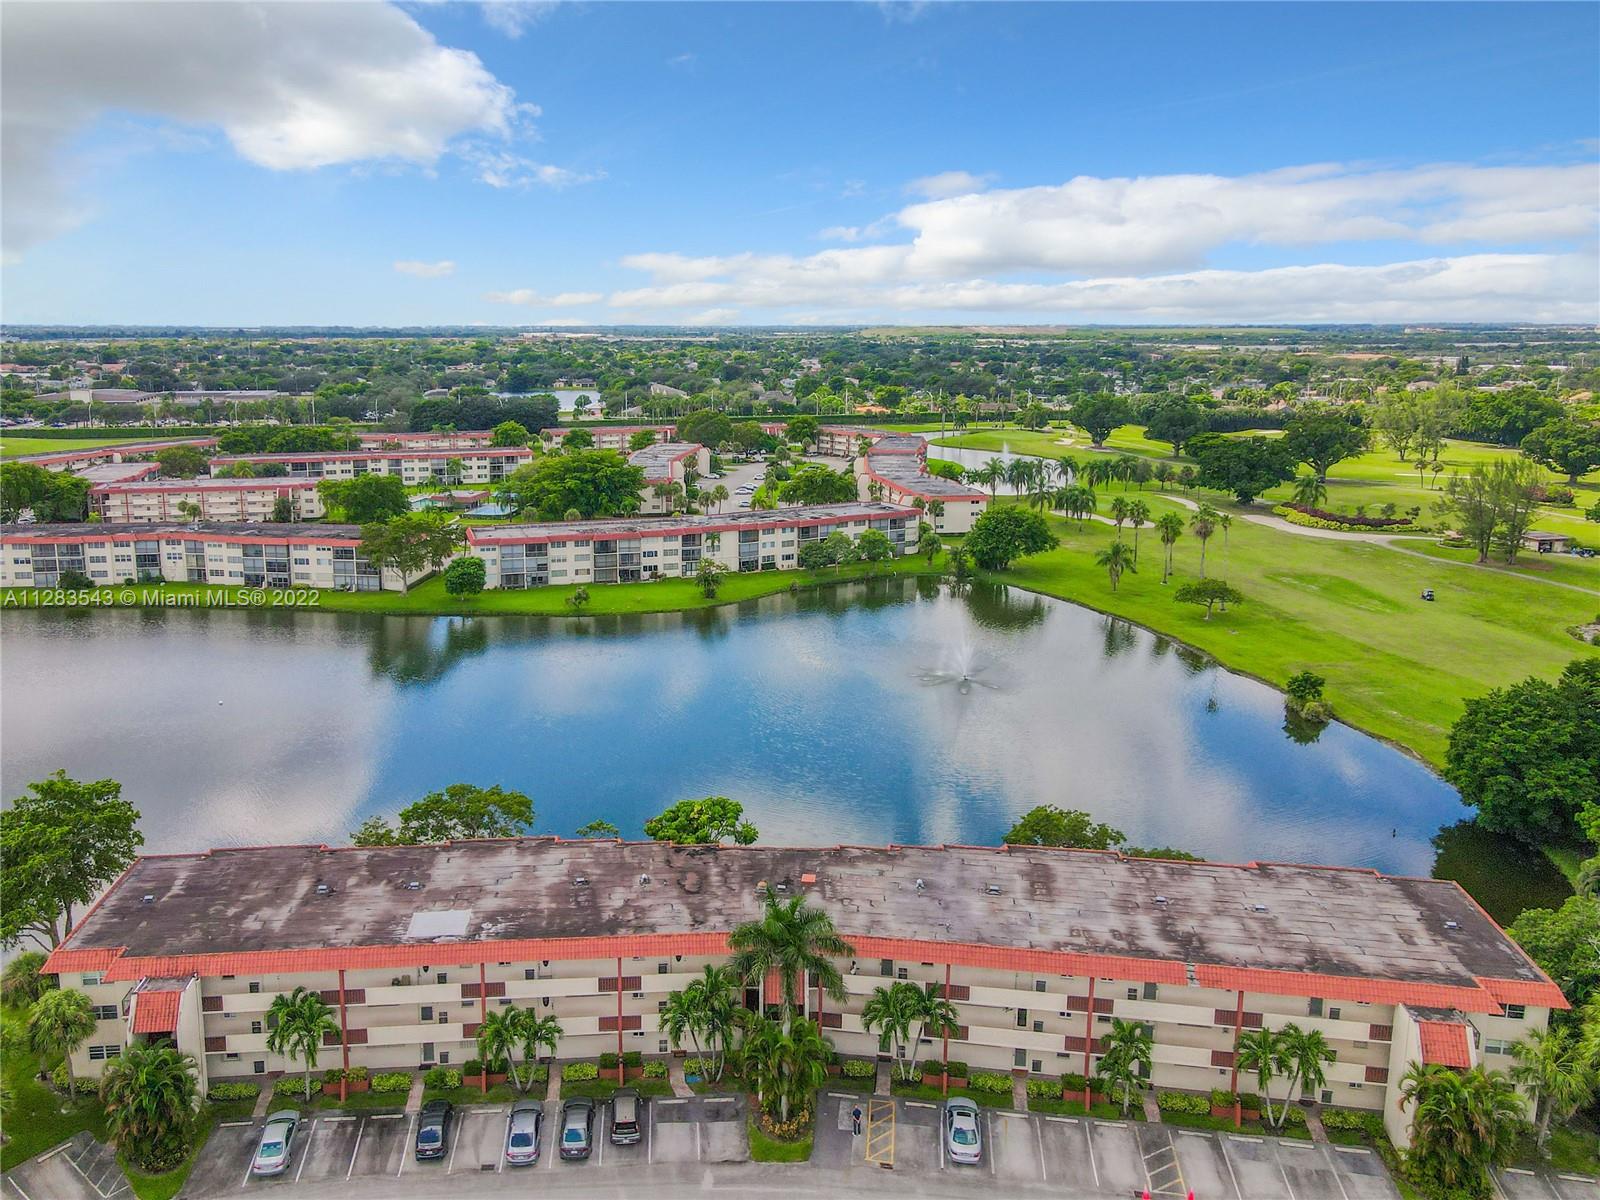 an aerial view of lake residential houses with outdoor space and lake view